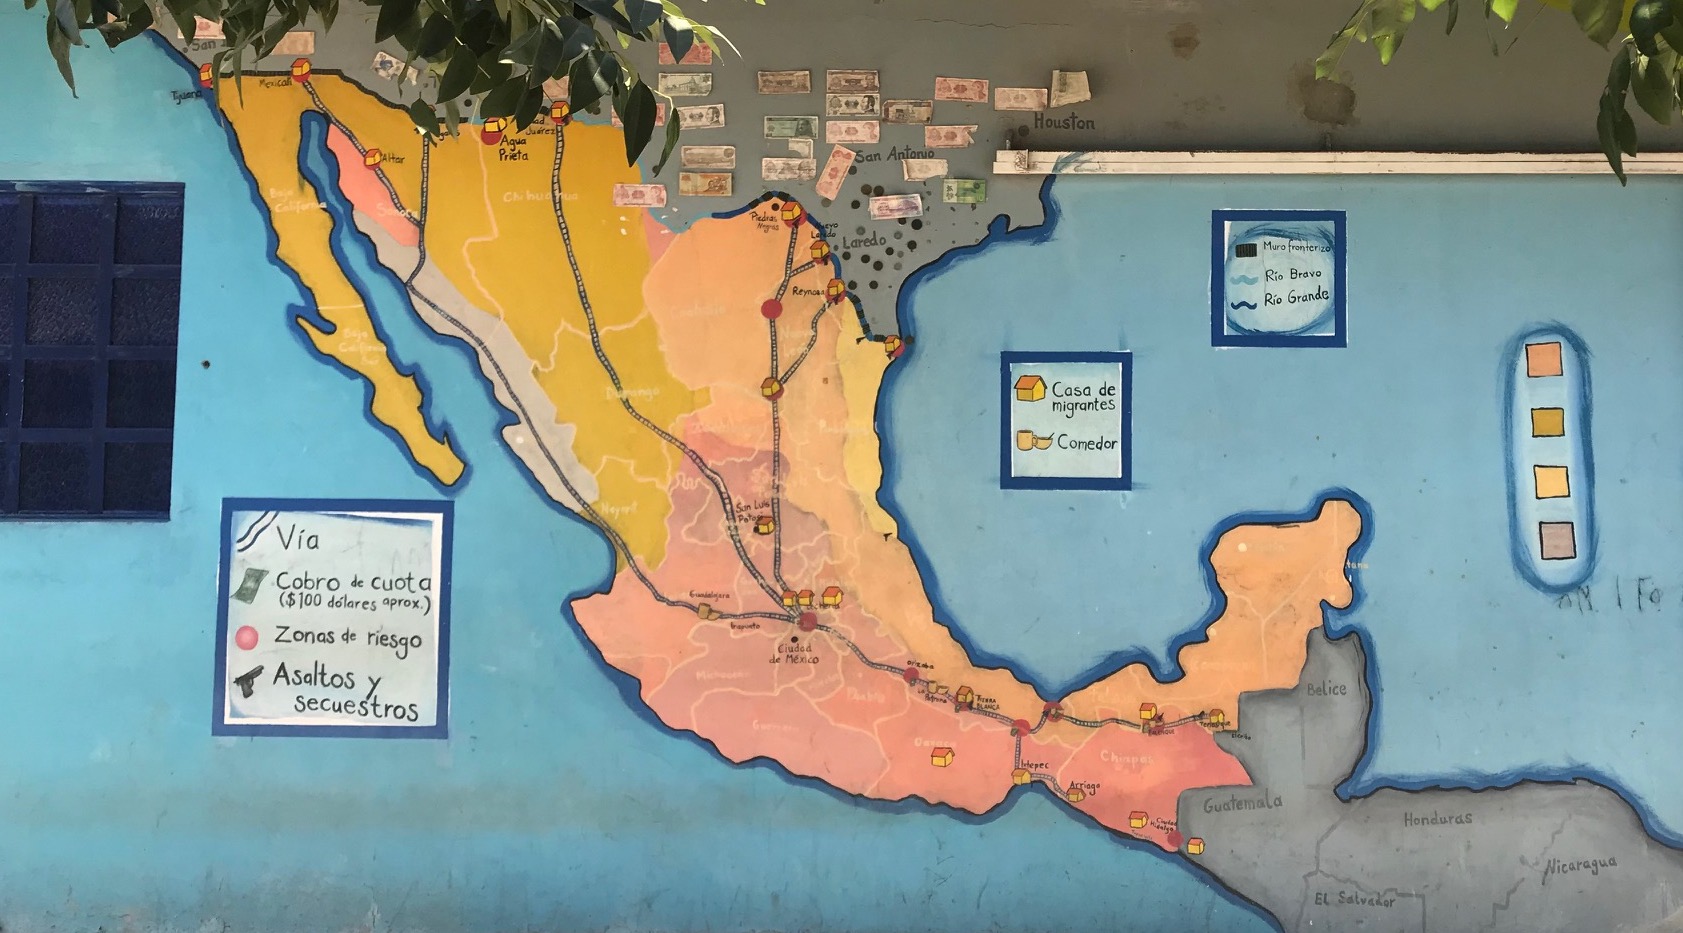 Mural of migration routes through Mexico